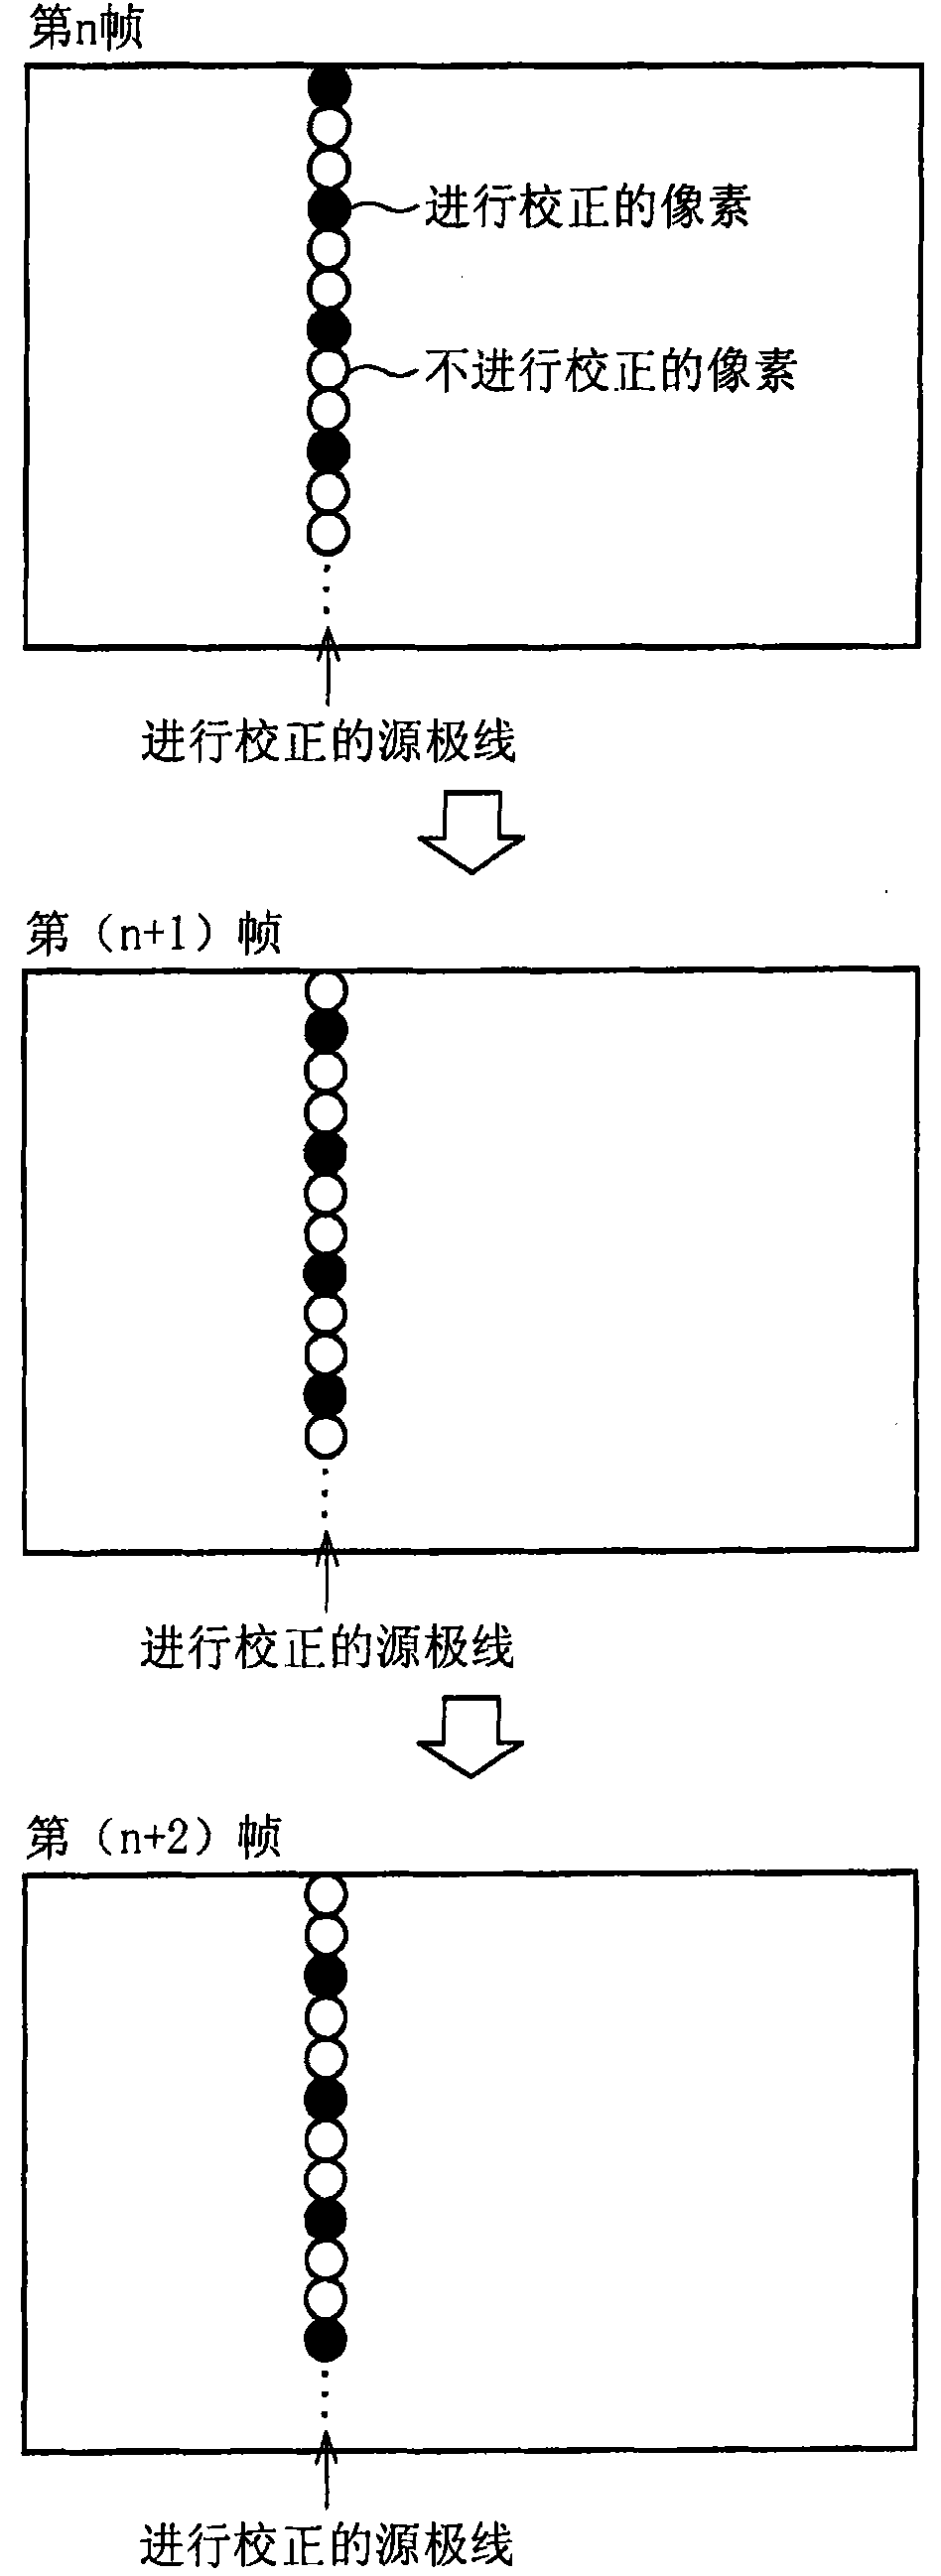 Display device, correction system, forming device, determining device and method